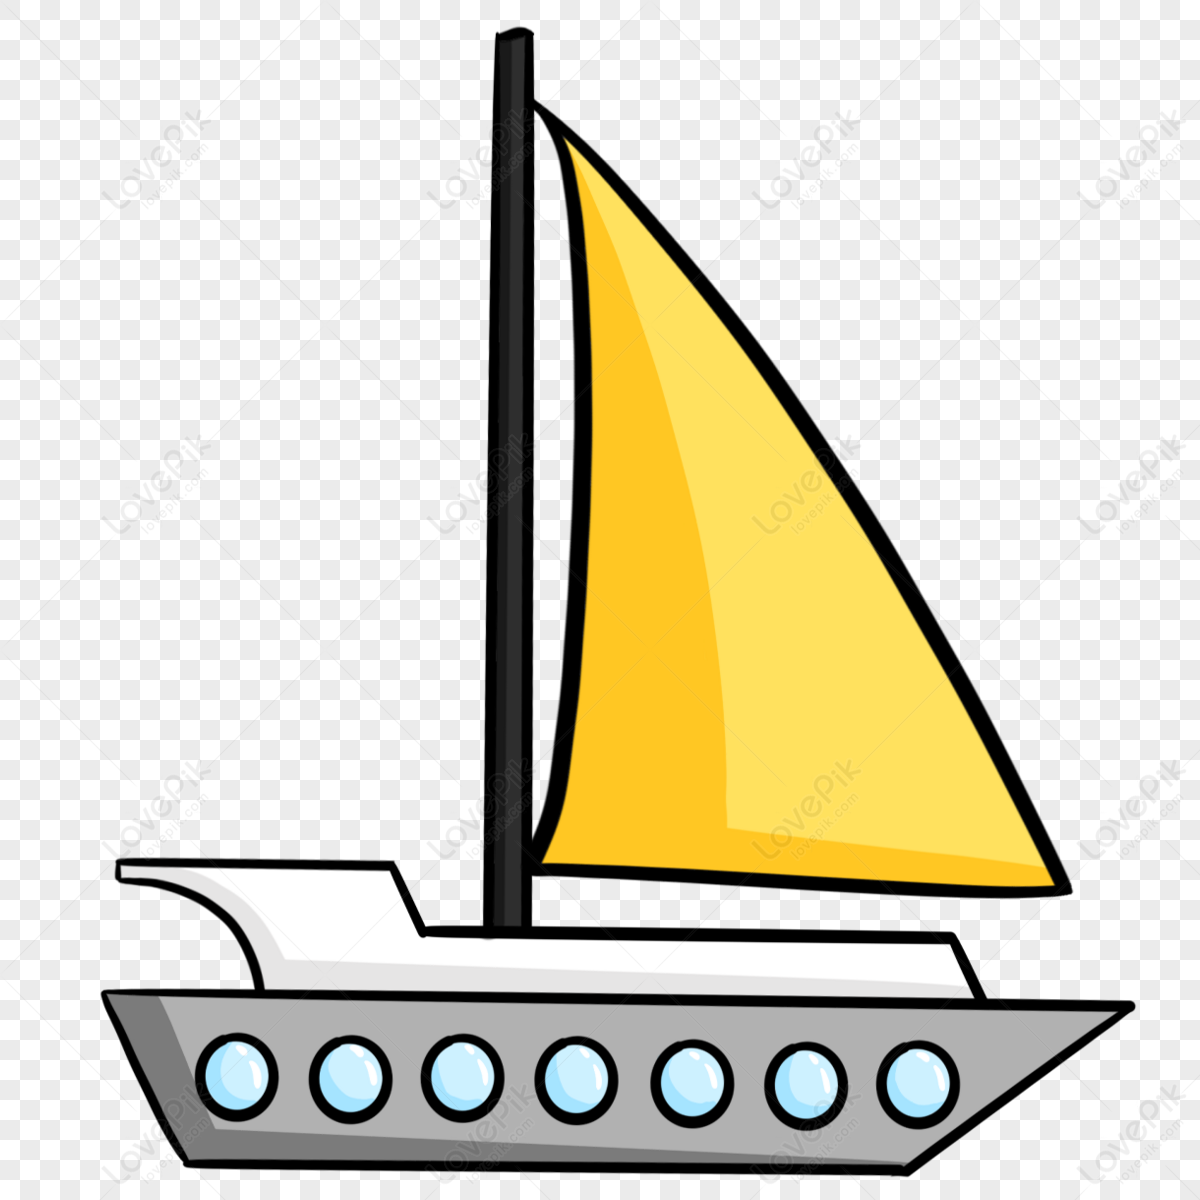 Yellow sailboat lineart clipart,line draft,ferry png free download